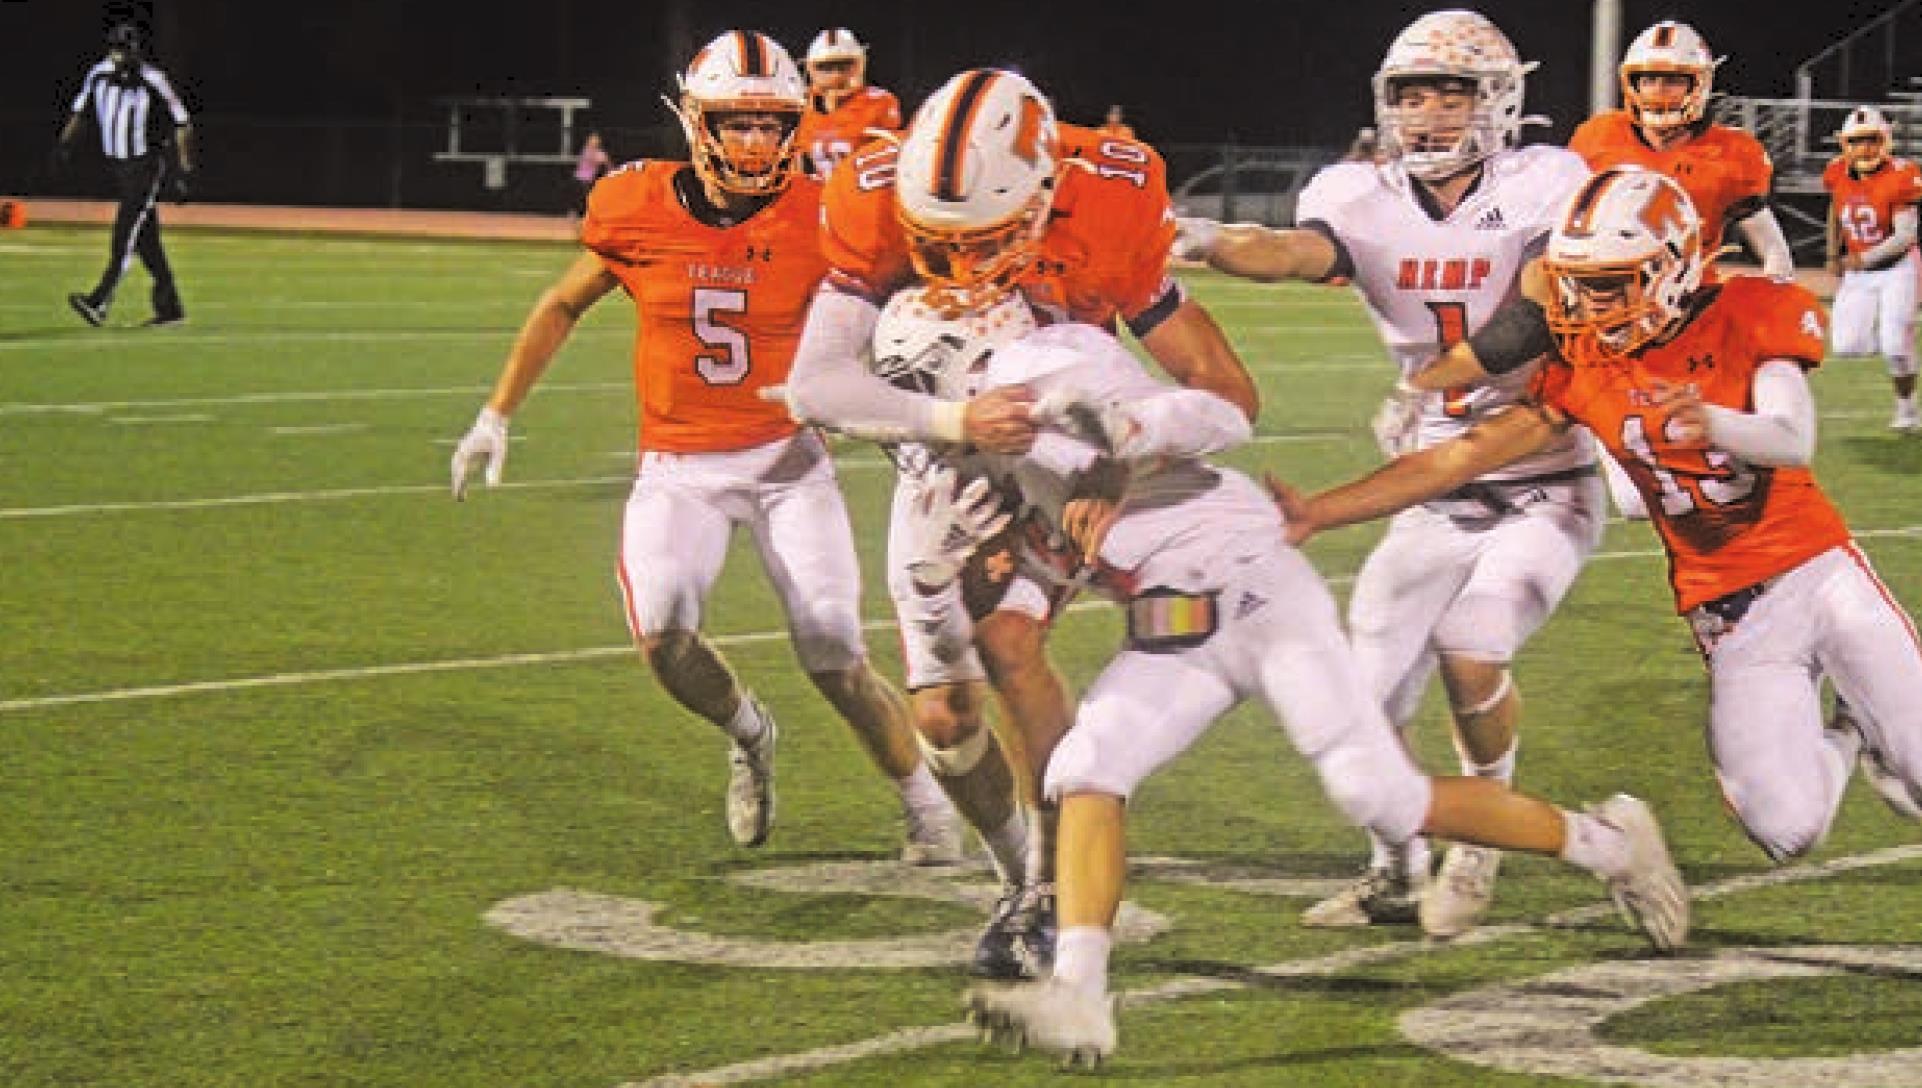 Yellowjackets sting Lions in district opener 48-34 | Groesbeck Journal